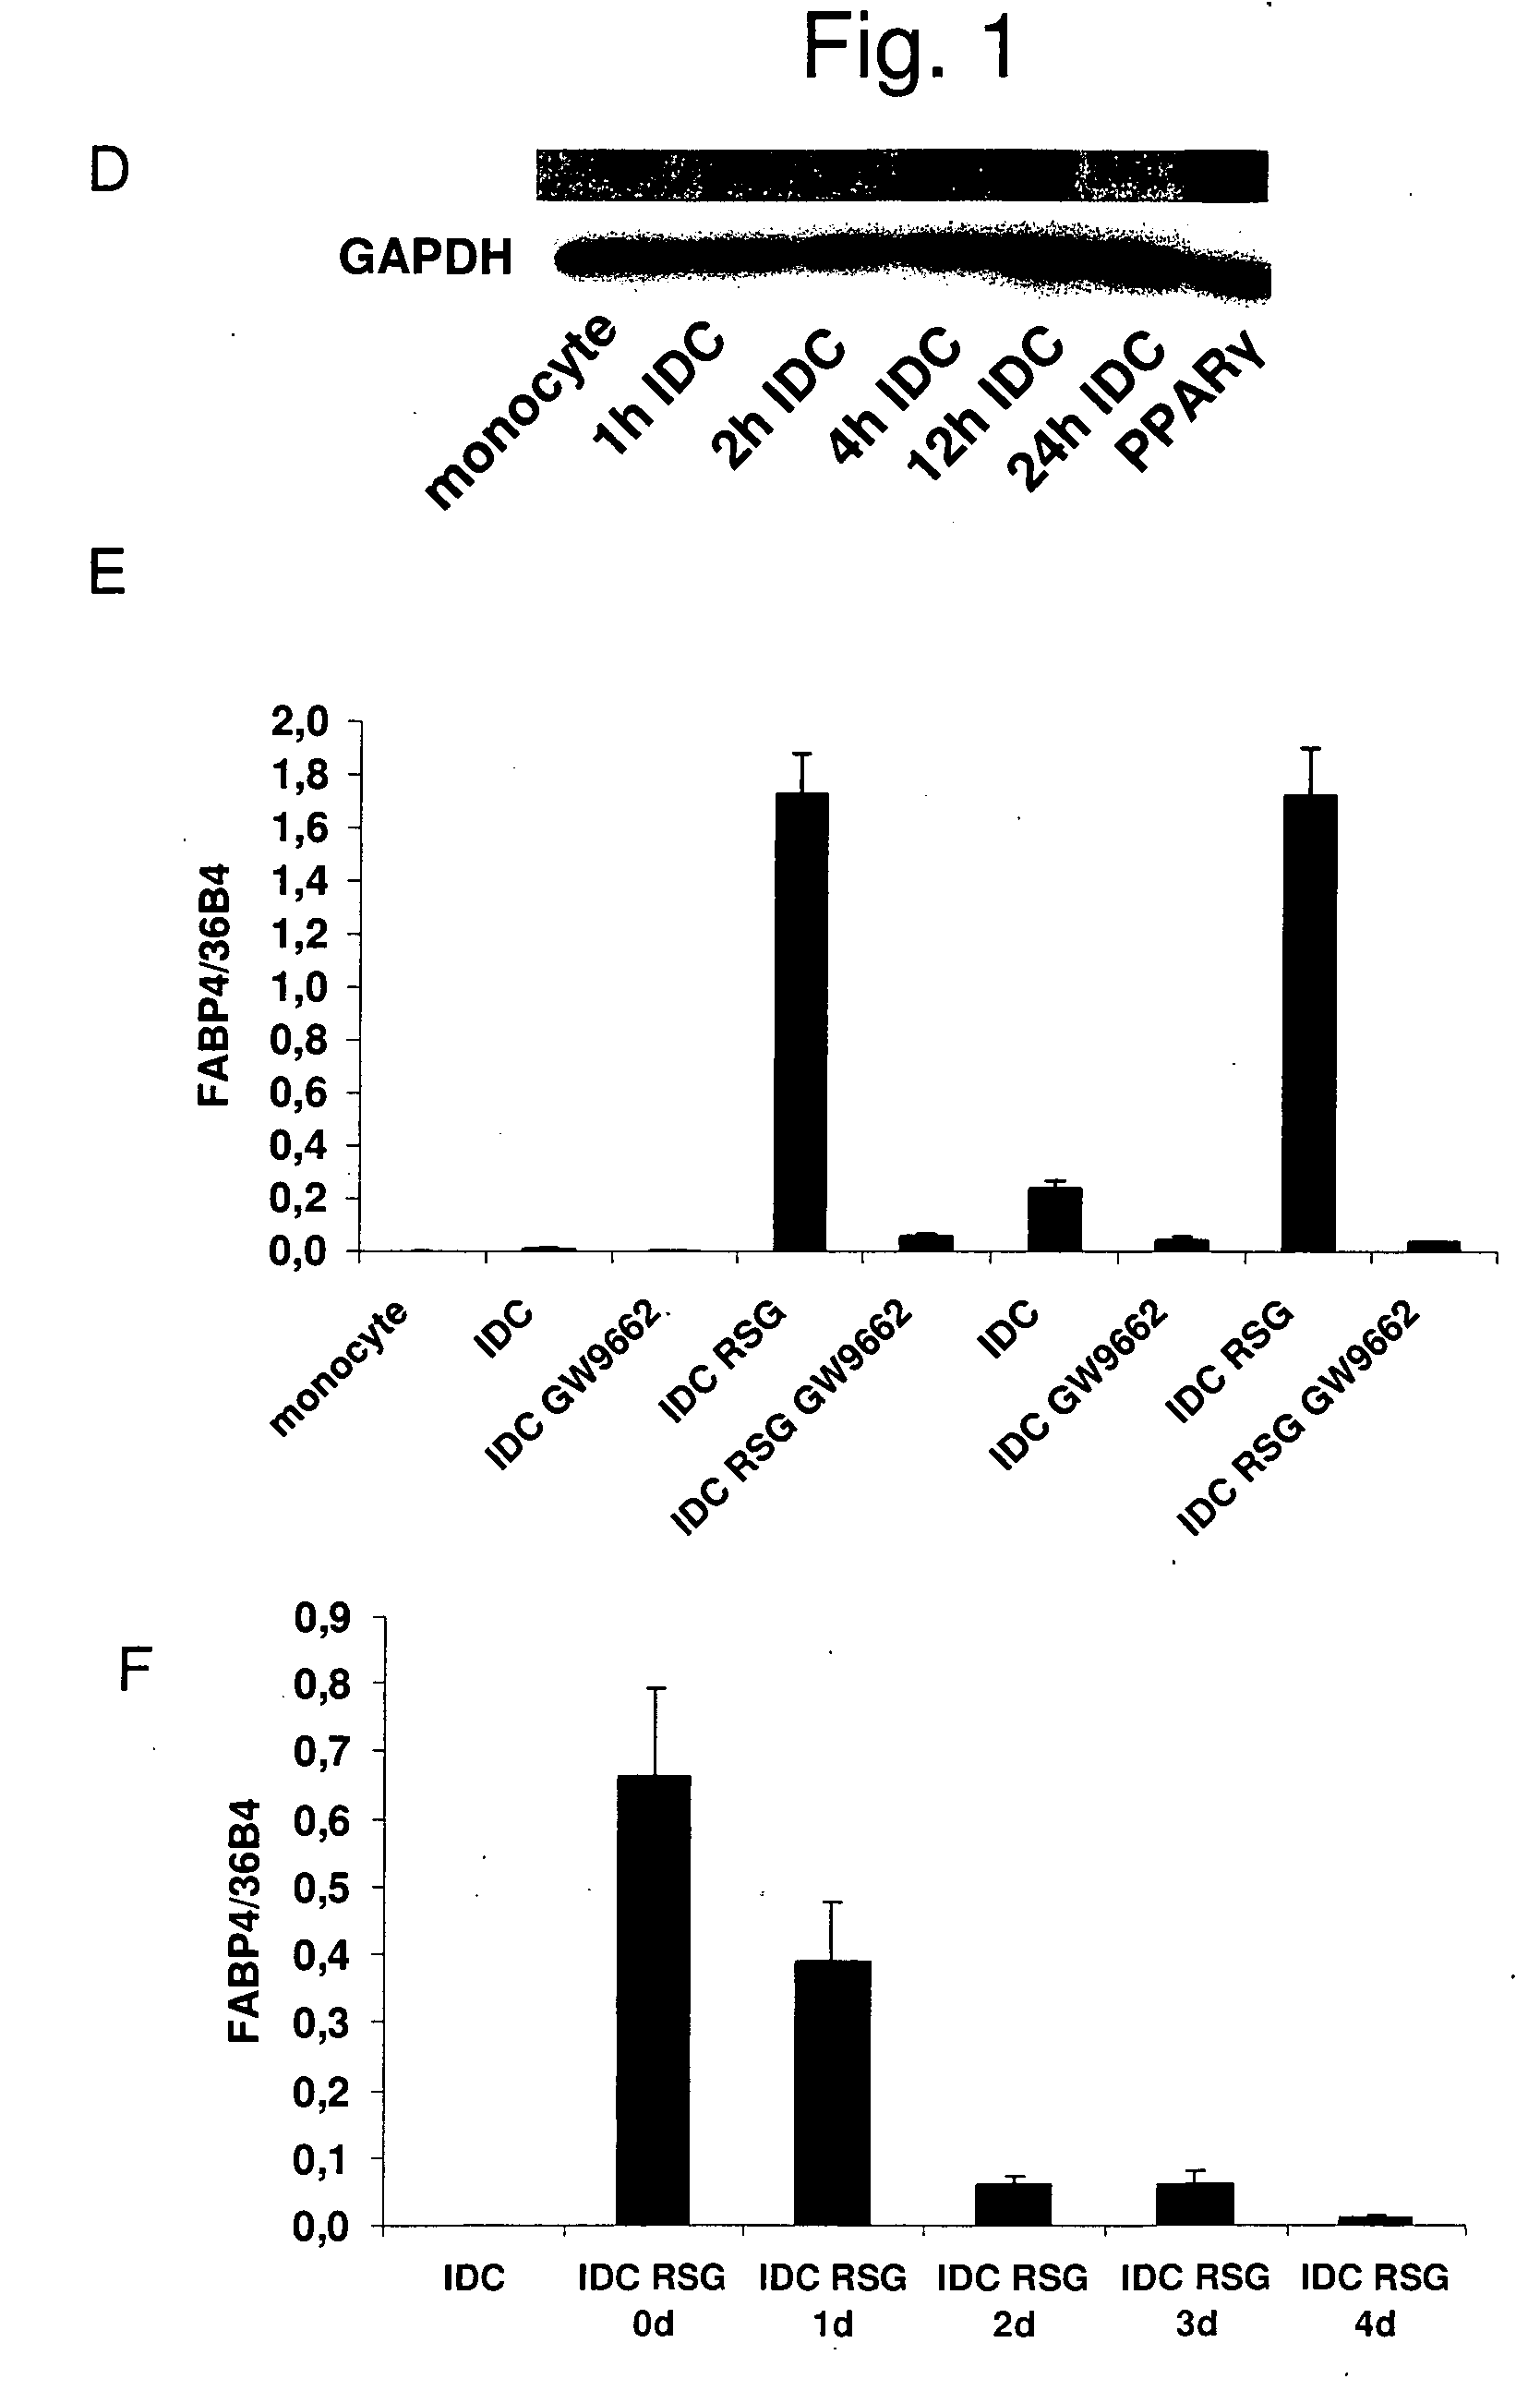 Novel uses of PPAR modulators and professional APCs manipulated by the same